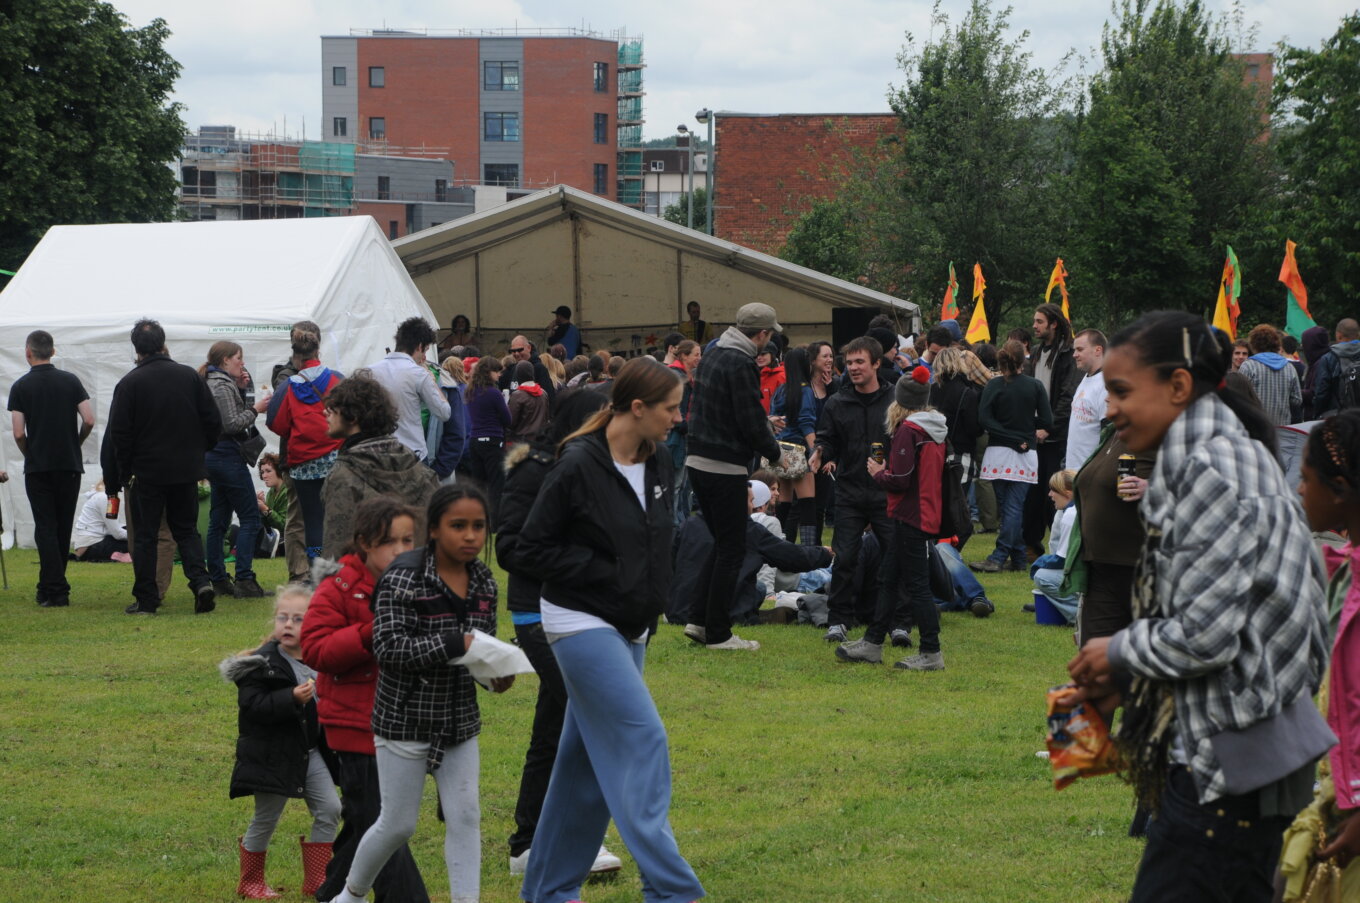 A group of people at an outdoor festival on grass, with tents in the background and buildings behind them.